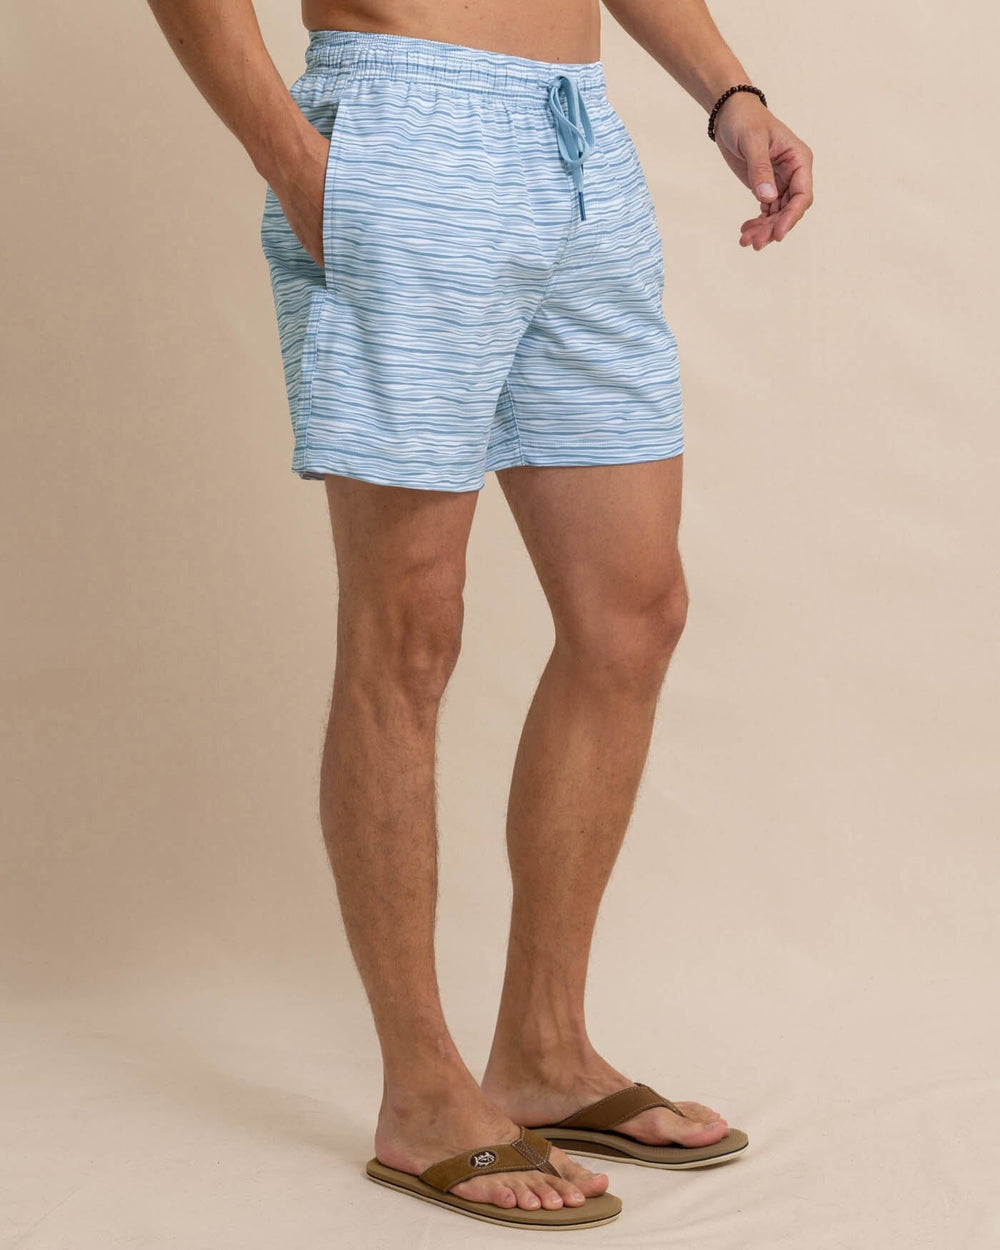 The front view of the Southern Tide Ocean Water Stripe Swim Trunk by Southern Tide - Subdued Blue